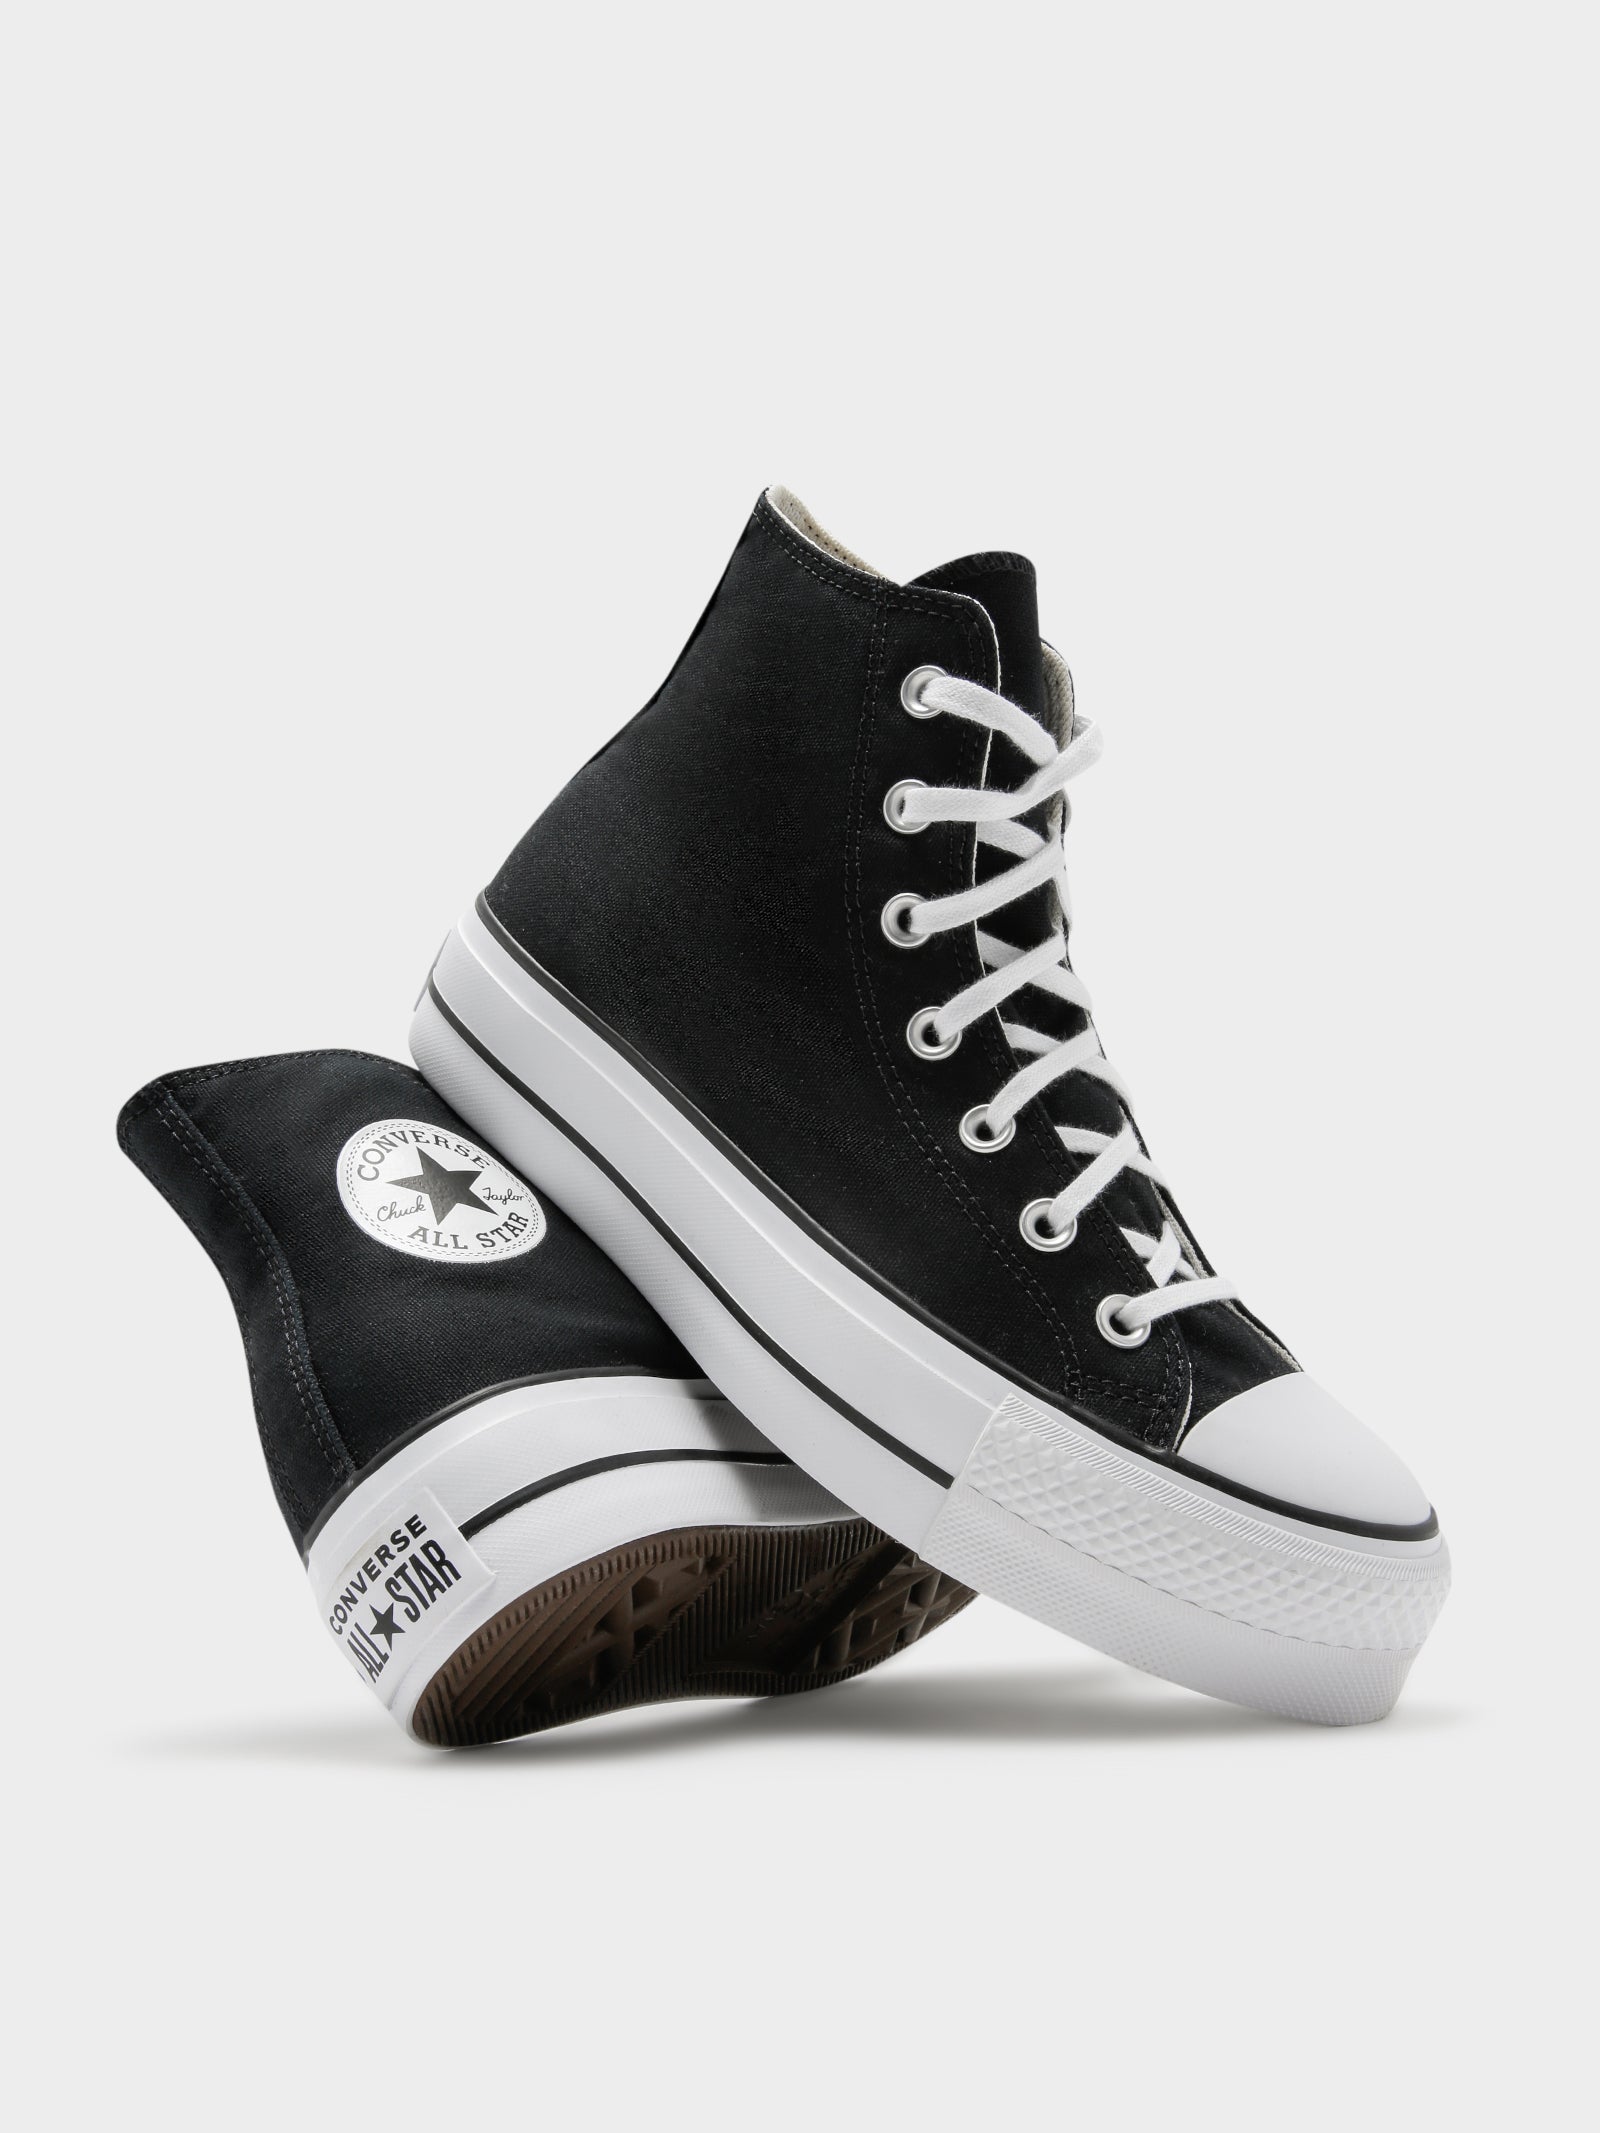 Womens Chuck Taylor All Star Lift Hi Platform Sneakers in Black Canvas -  Glue Store